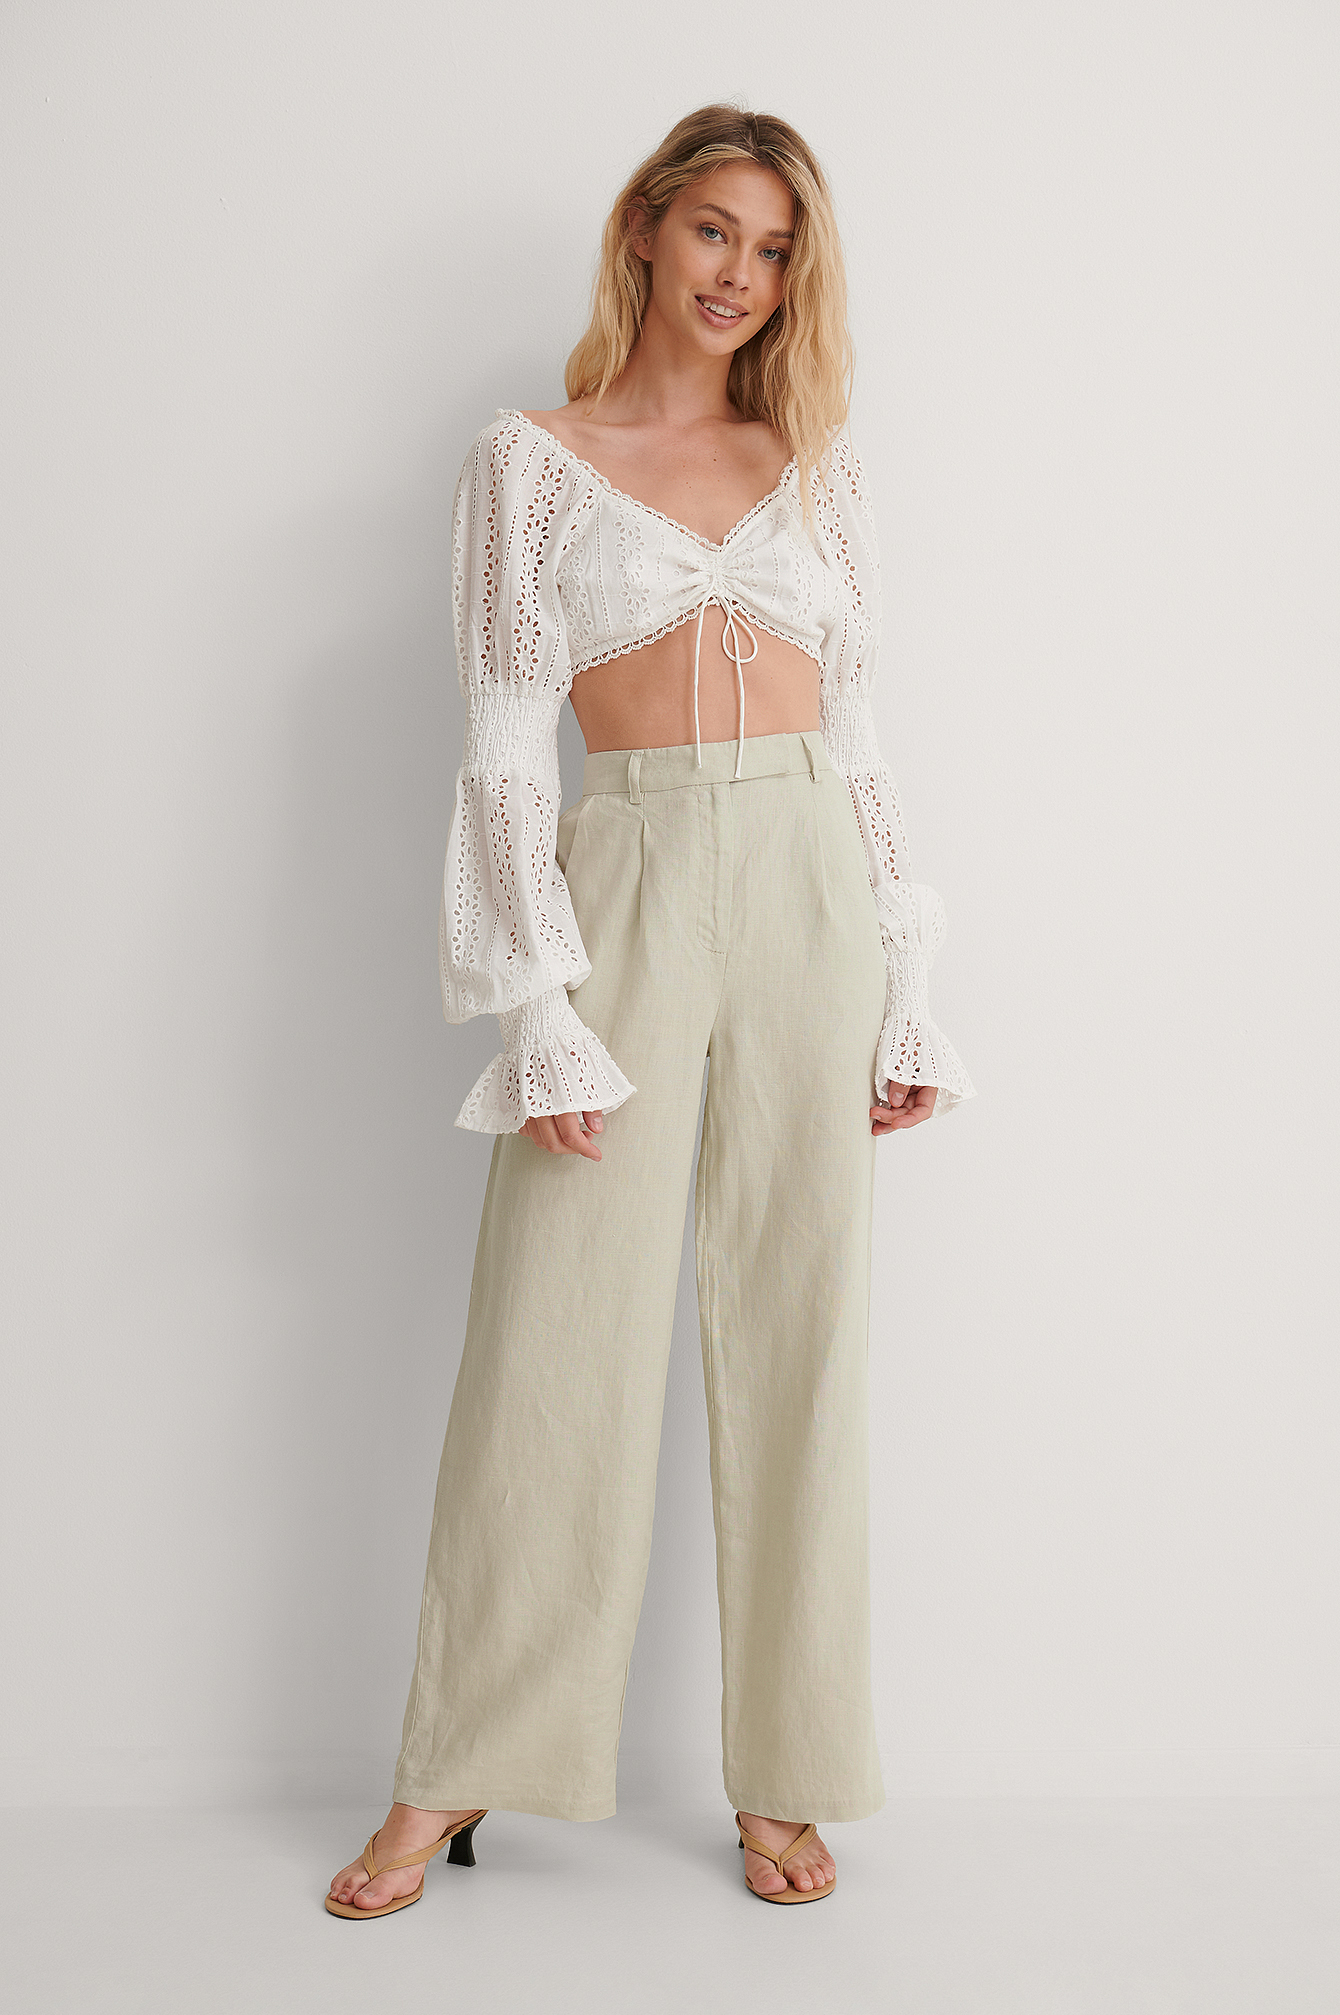 Cropped Anglaise Blouse Outfit.